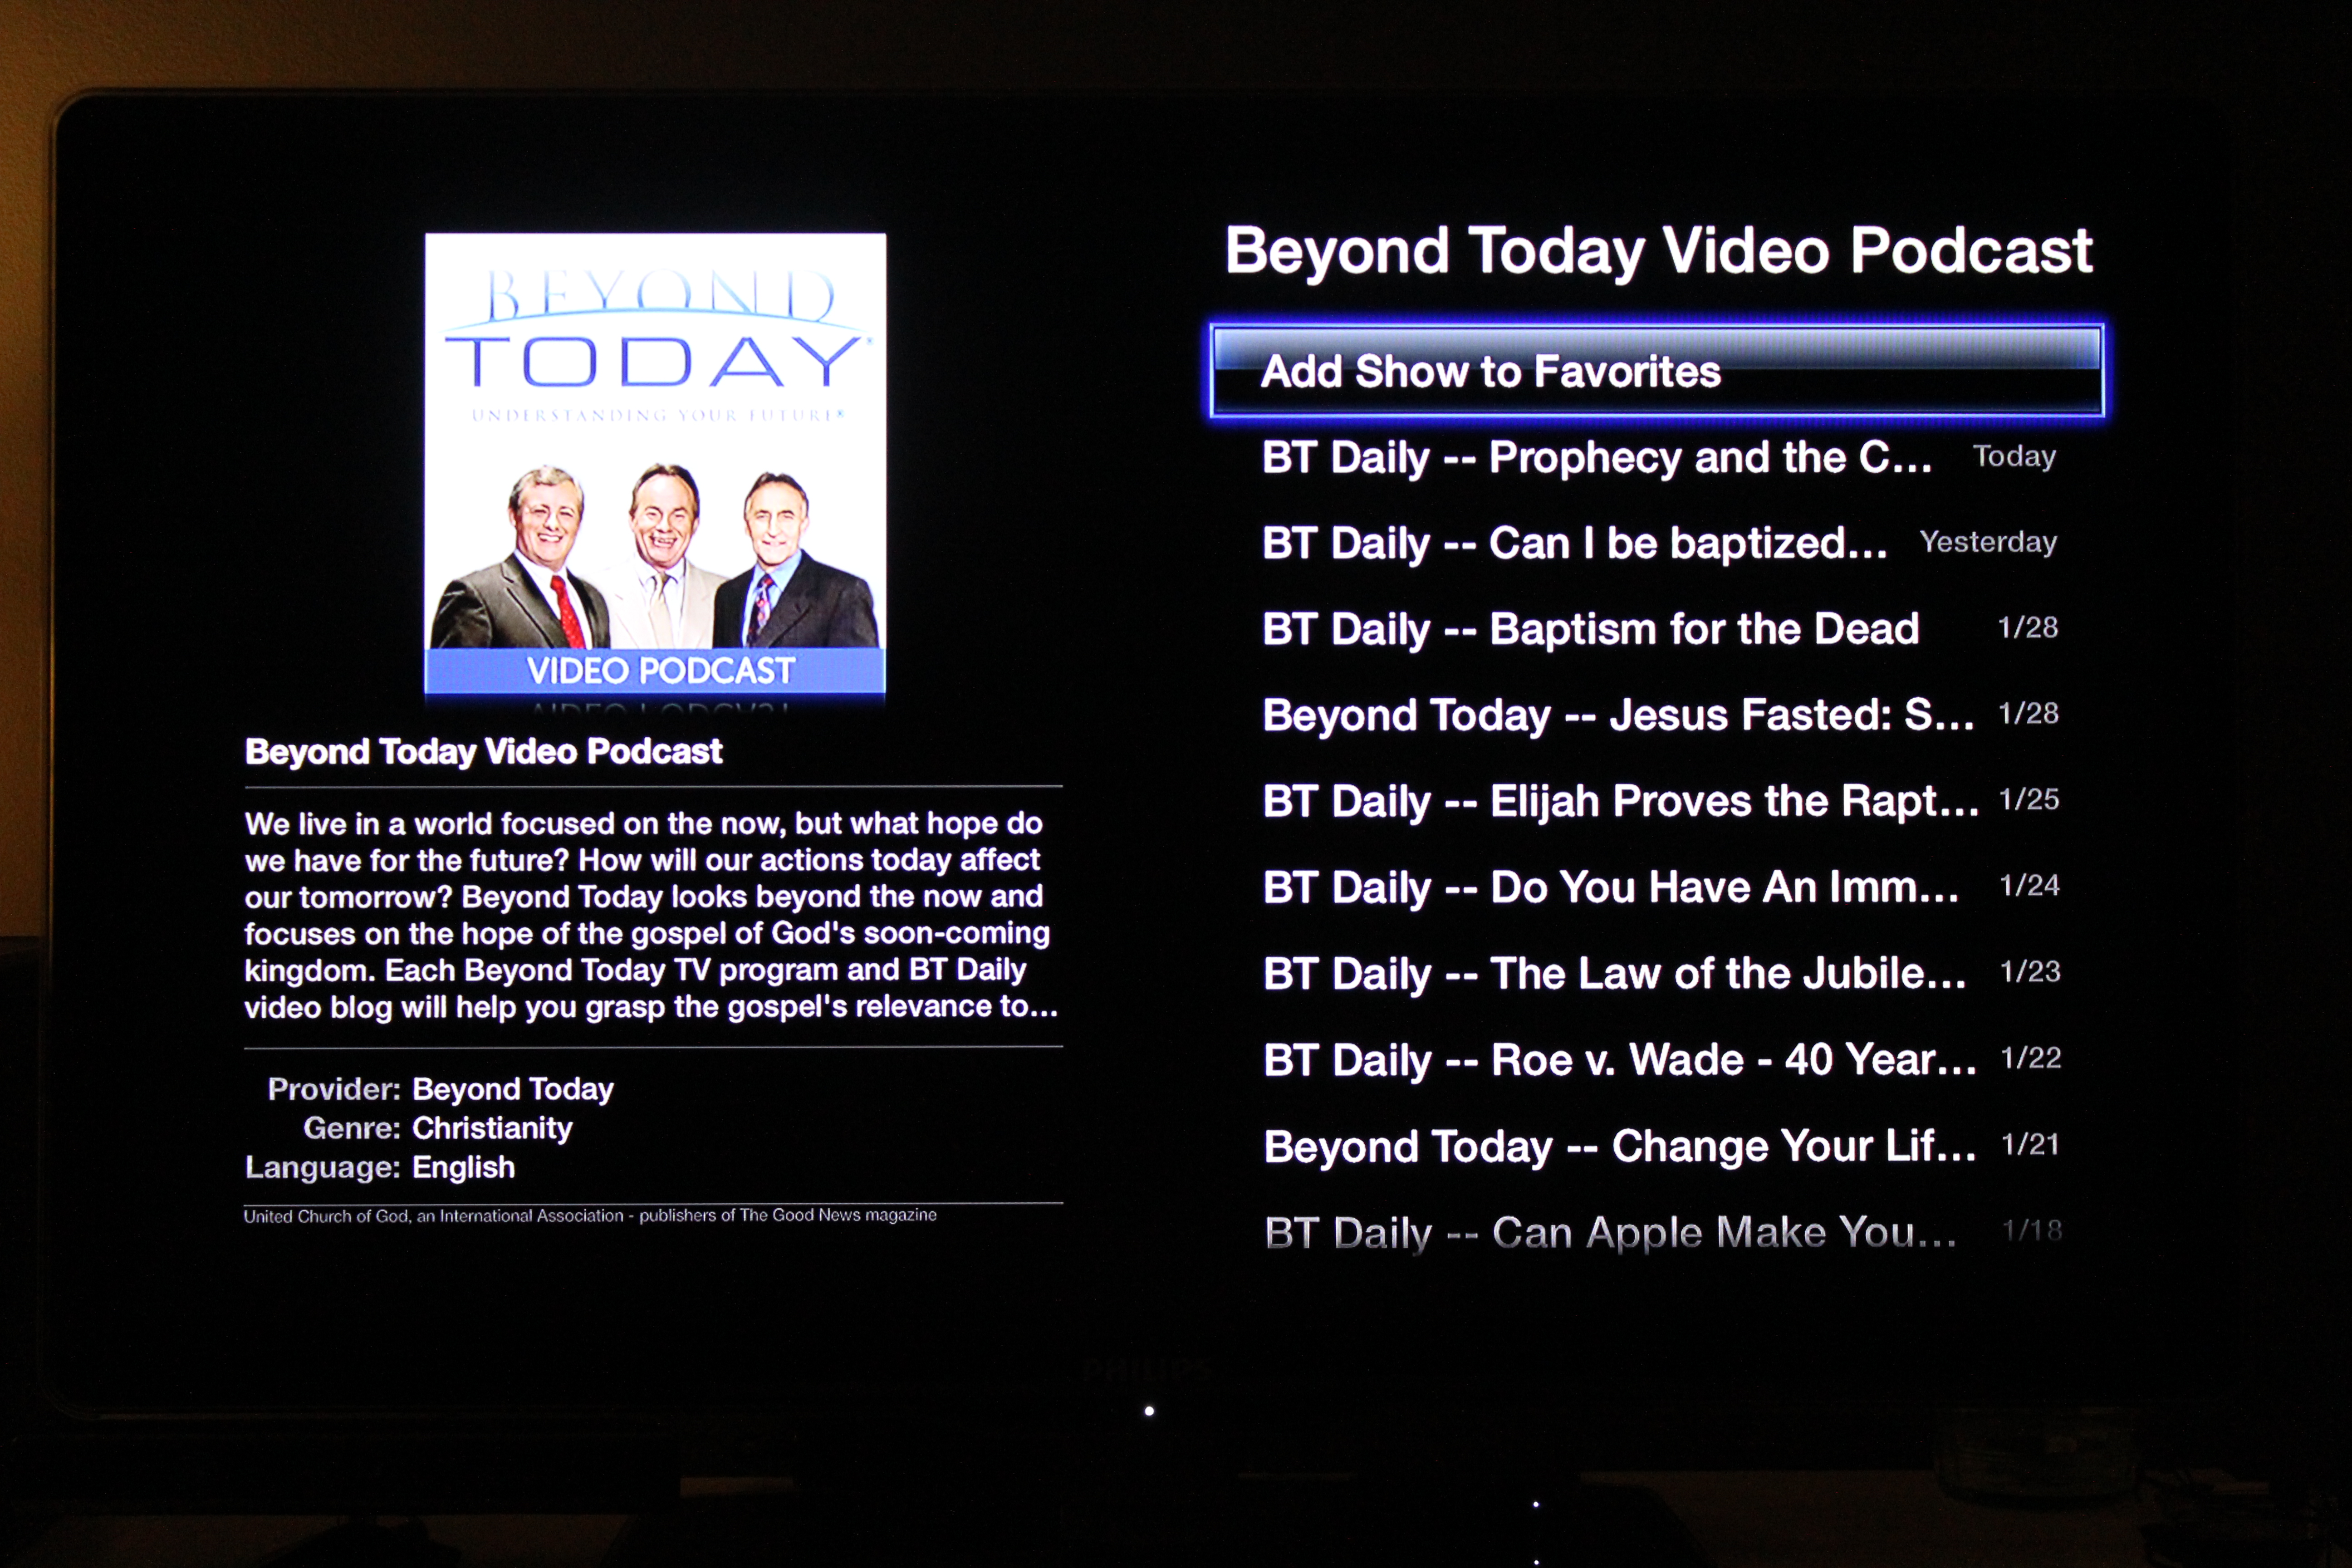 Watch Beyond Today on Apple TV